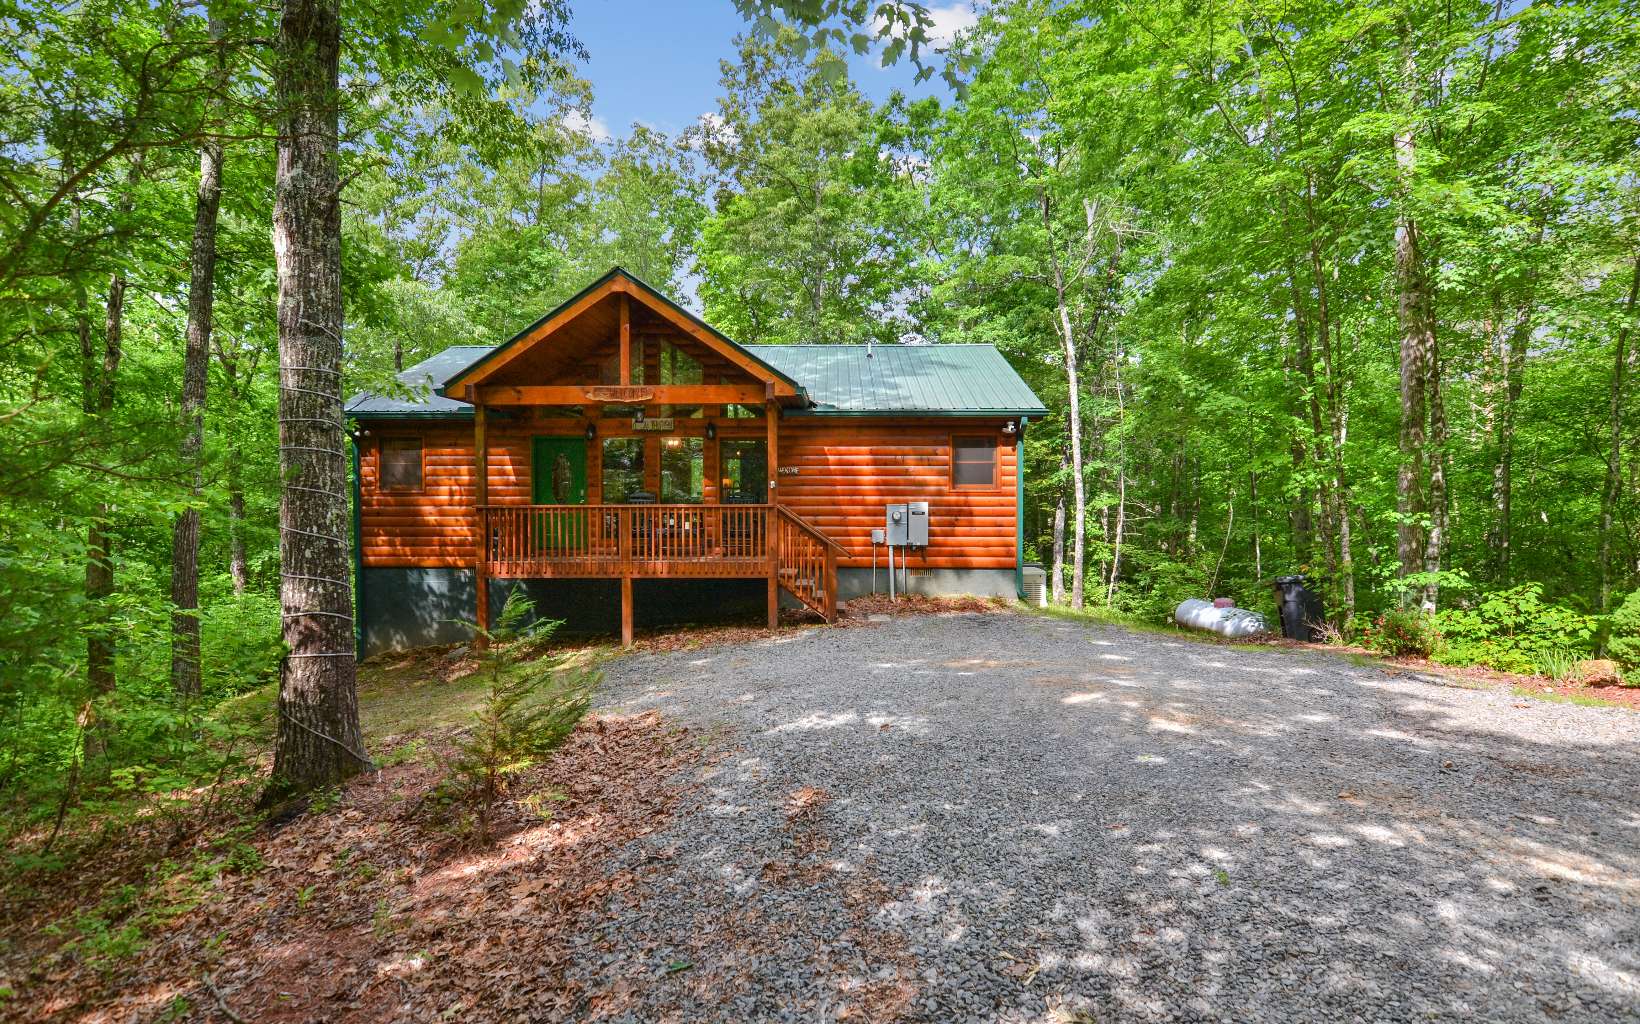 Storybook well maintained 3/2 cabin within minutes to downtown blue ridge, already a successful rental that has all the amenities you could want. Hot tub and game room on the interior and covered screened porches outside. A fenced area for the pets as well as a firepit to relax in the cool evenings. Large windows in the great room allow for large amounts of natural light, wood flooring throughout, spacious kitchen with granite countertops and breakfast bar. Outdoor storage shed is included as well as a whole house generator for peace of mind. 1.17 acre level lot for privacy, level lot and all wood exterior provide low maintenance, lower than average utility costs and also being sold furnished. Would also make a great weekend or full time home. Start your journey in north ga now!